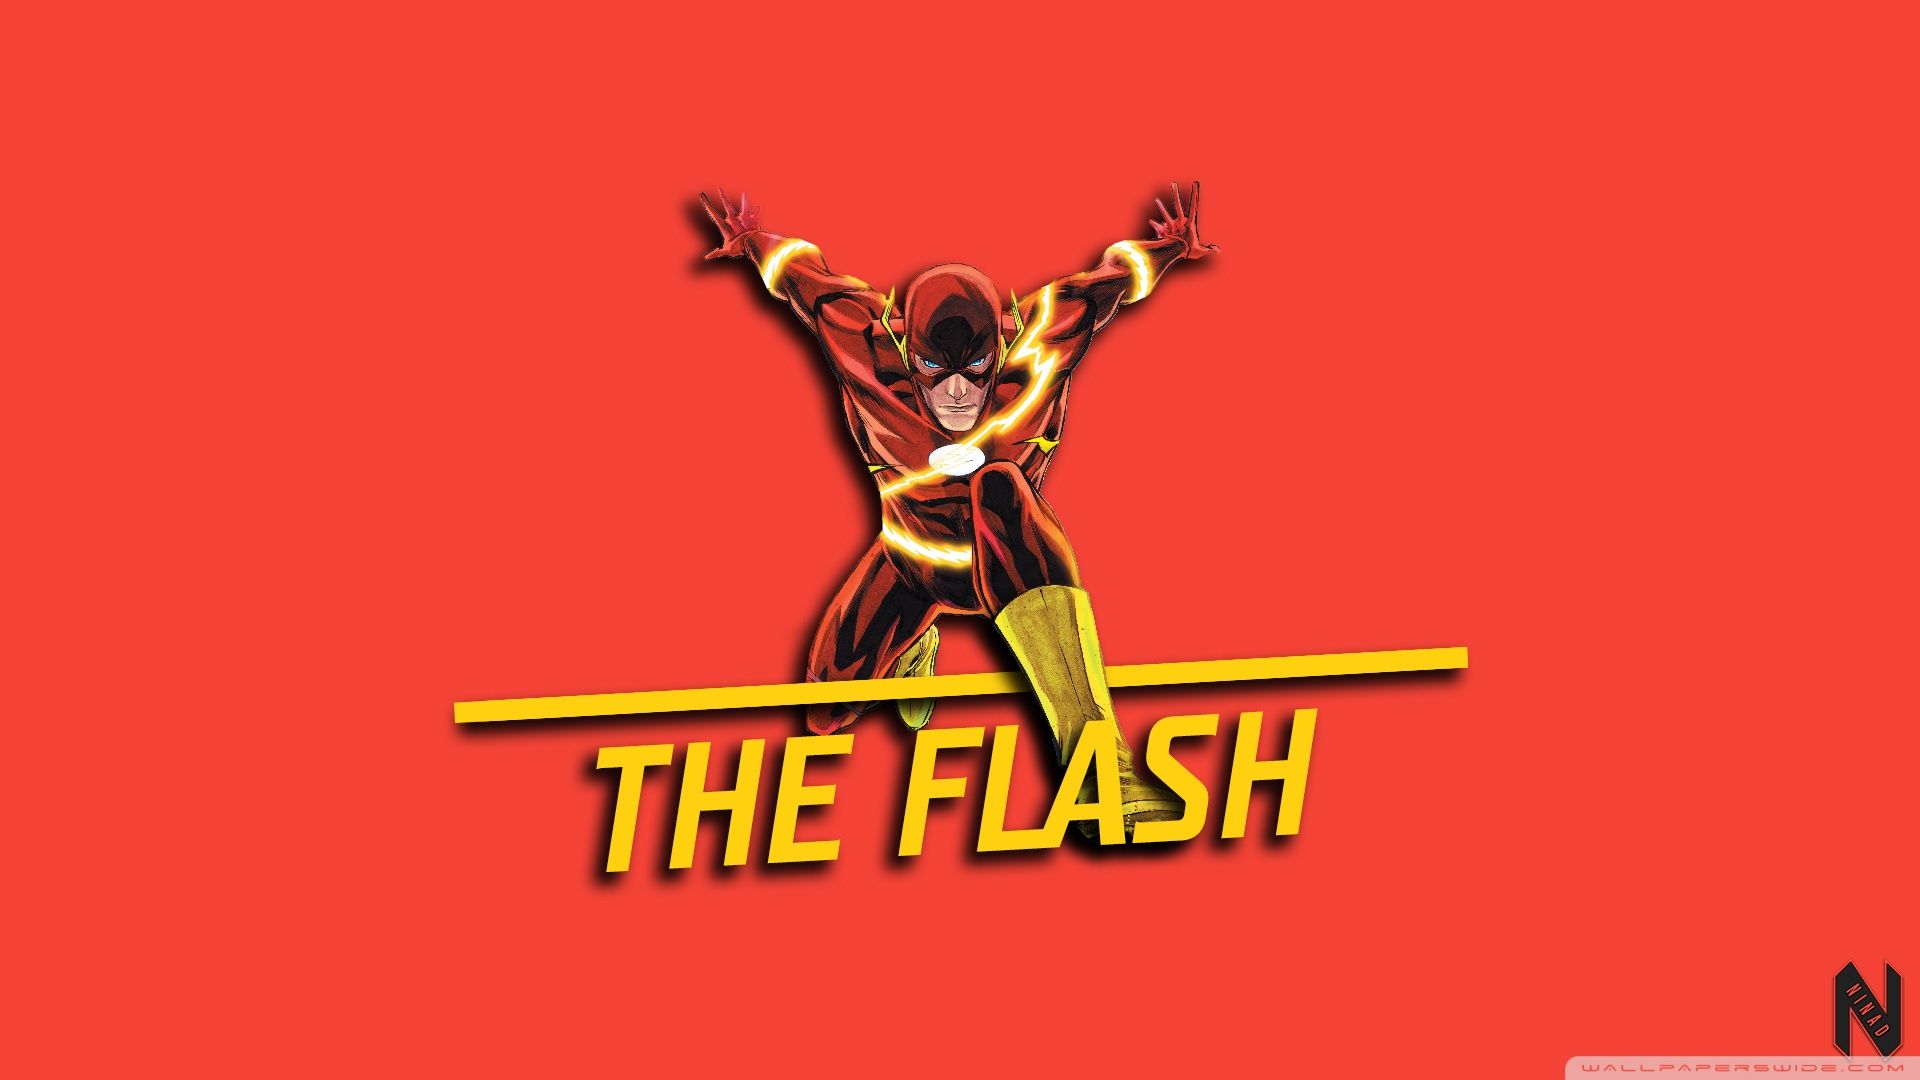 New The Flash Wallpaper Widescreen To Download Wallpaper. Flash